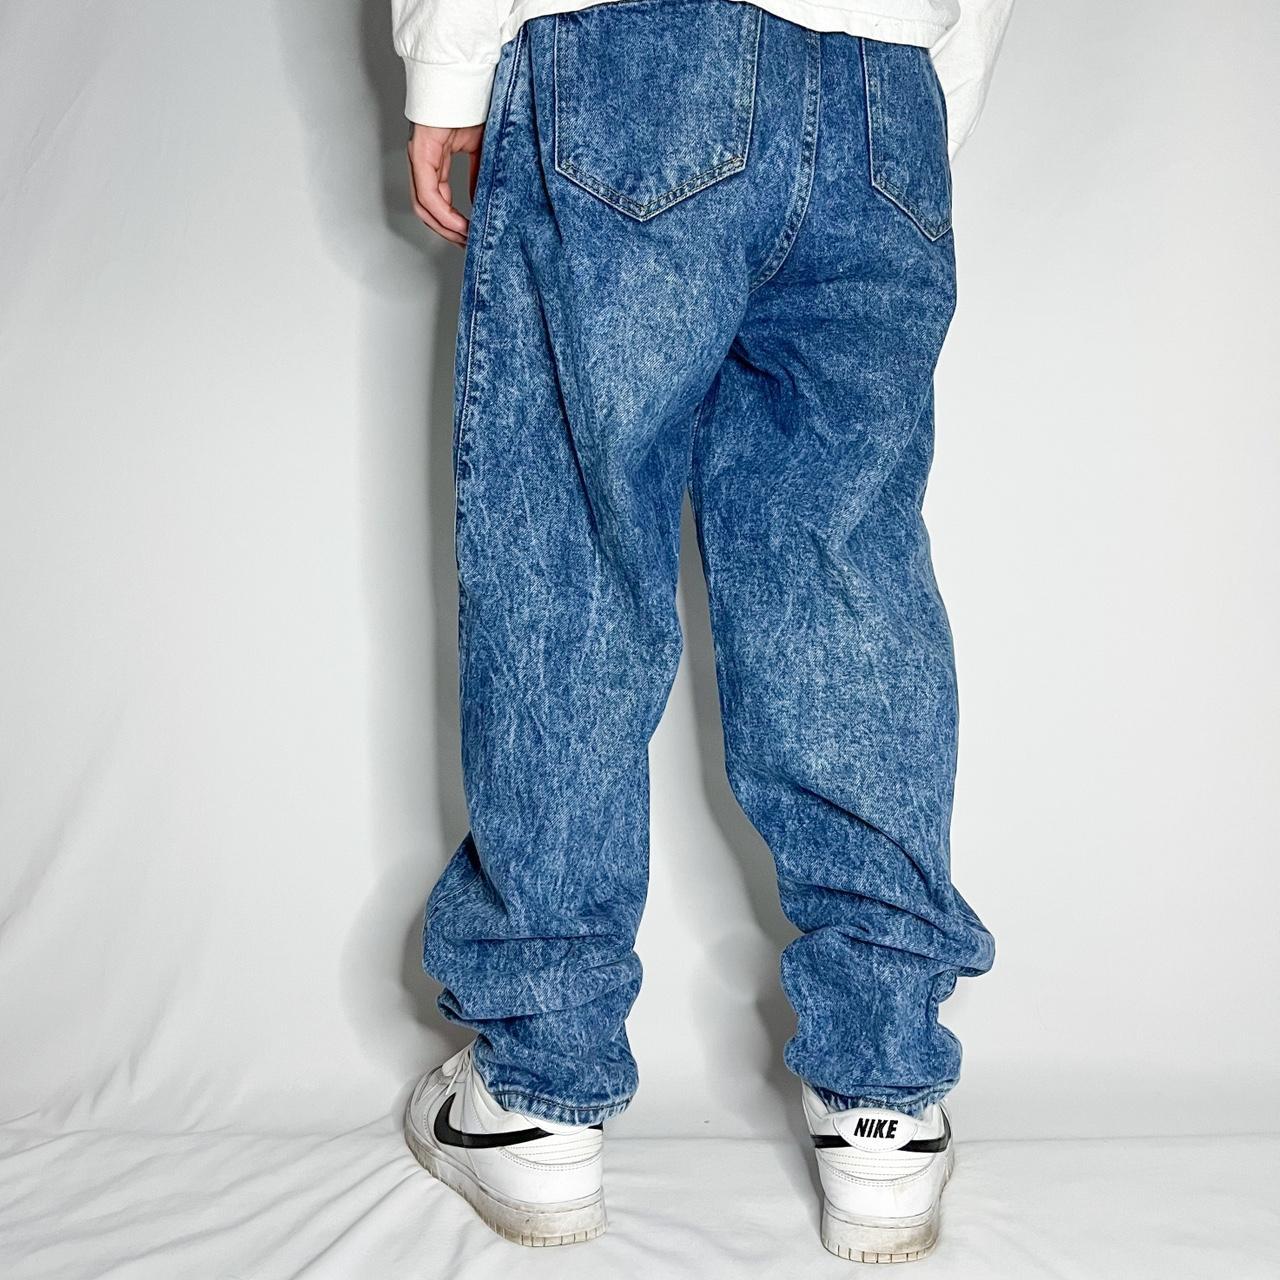 Product Image 2 - Vintage Sasson Jeans

- Great Condition!
-